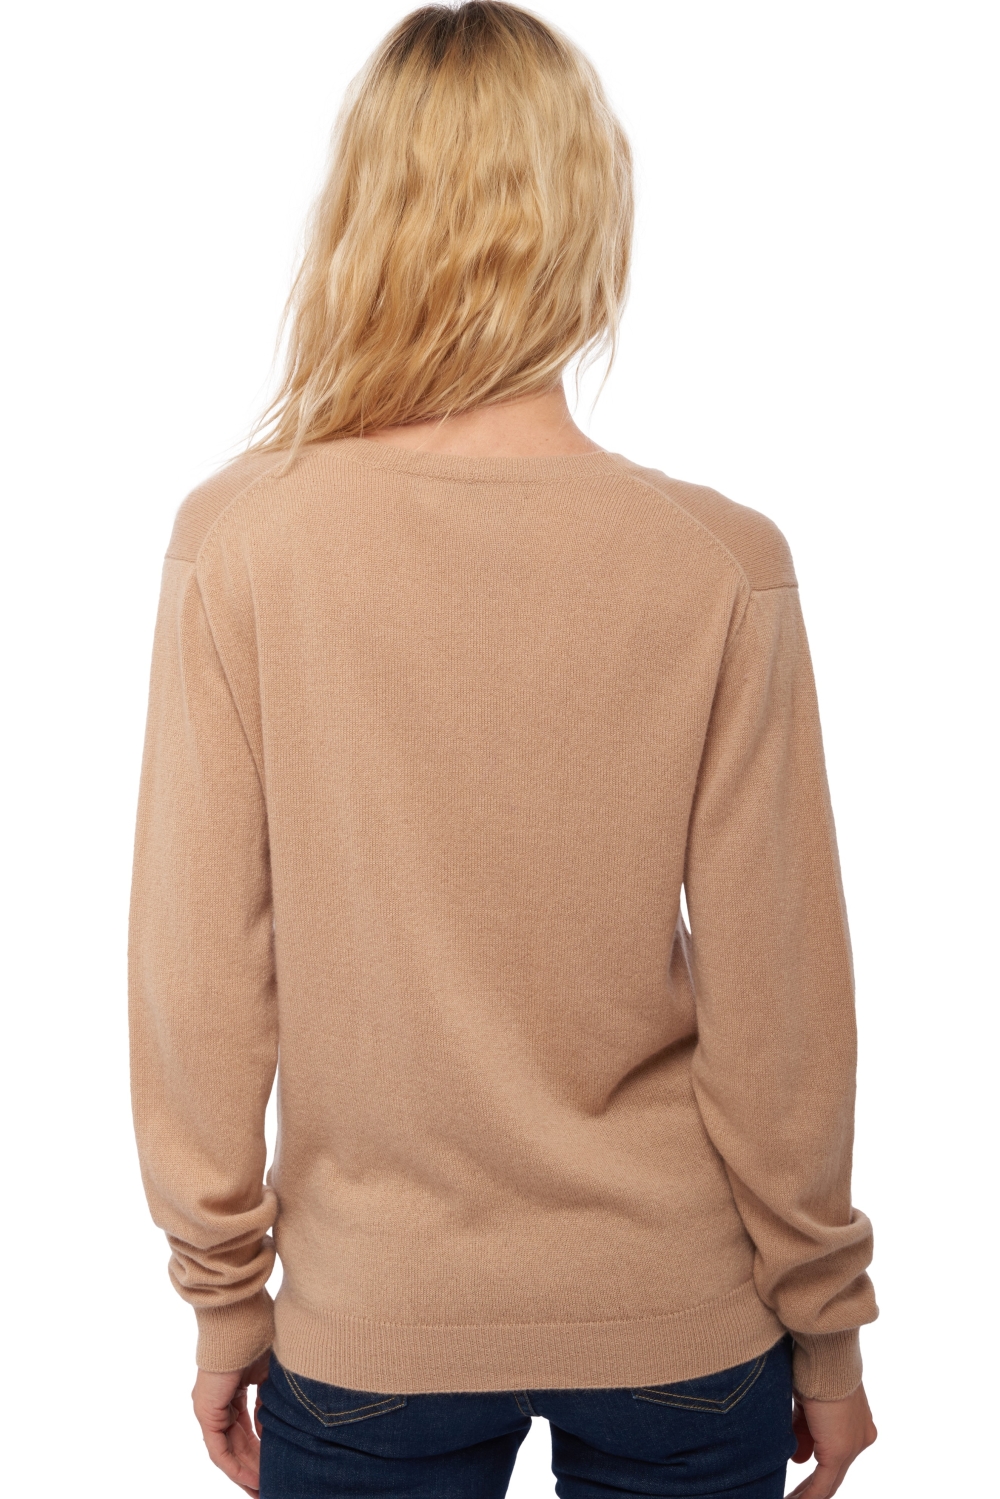 Cashmere ladies basic sweaters at low prices taline granola m